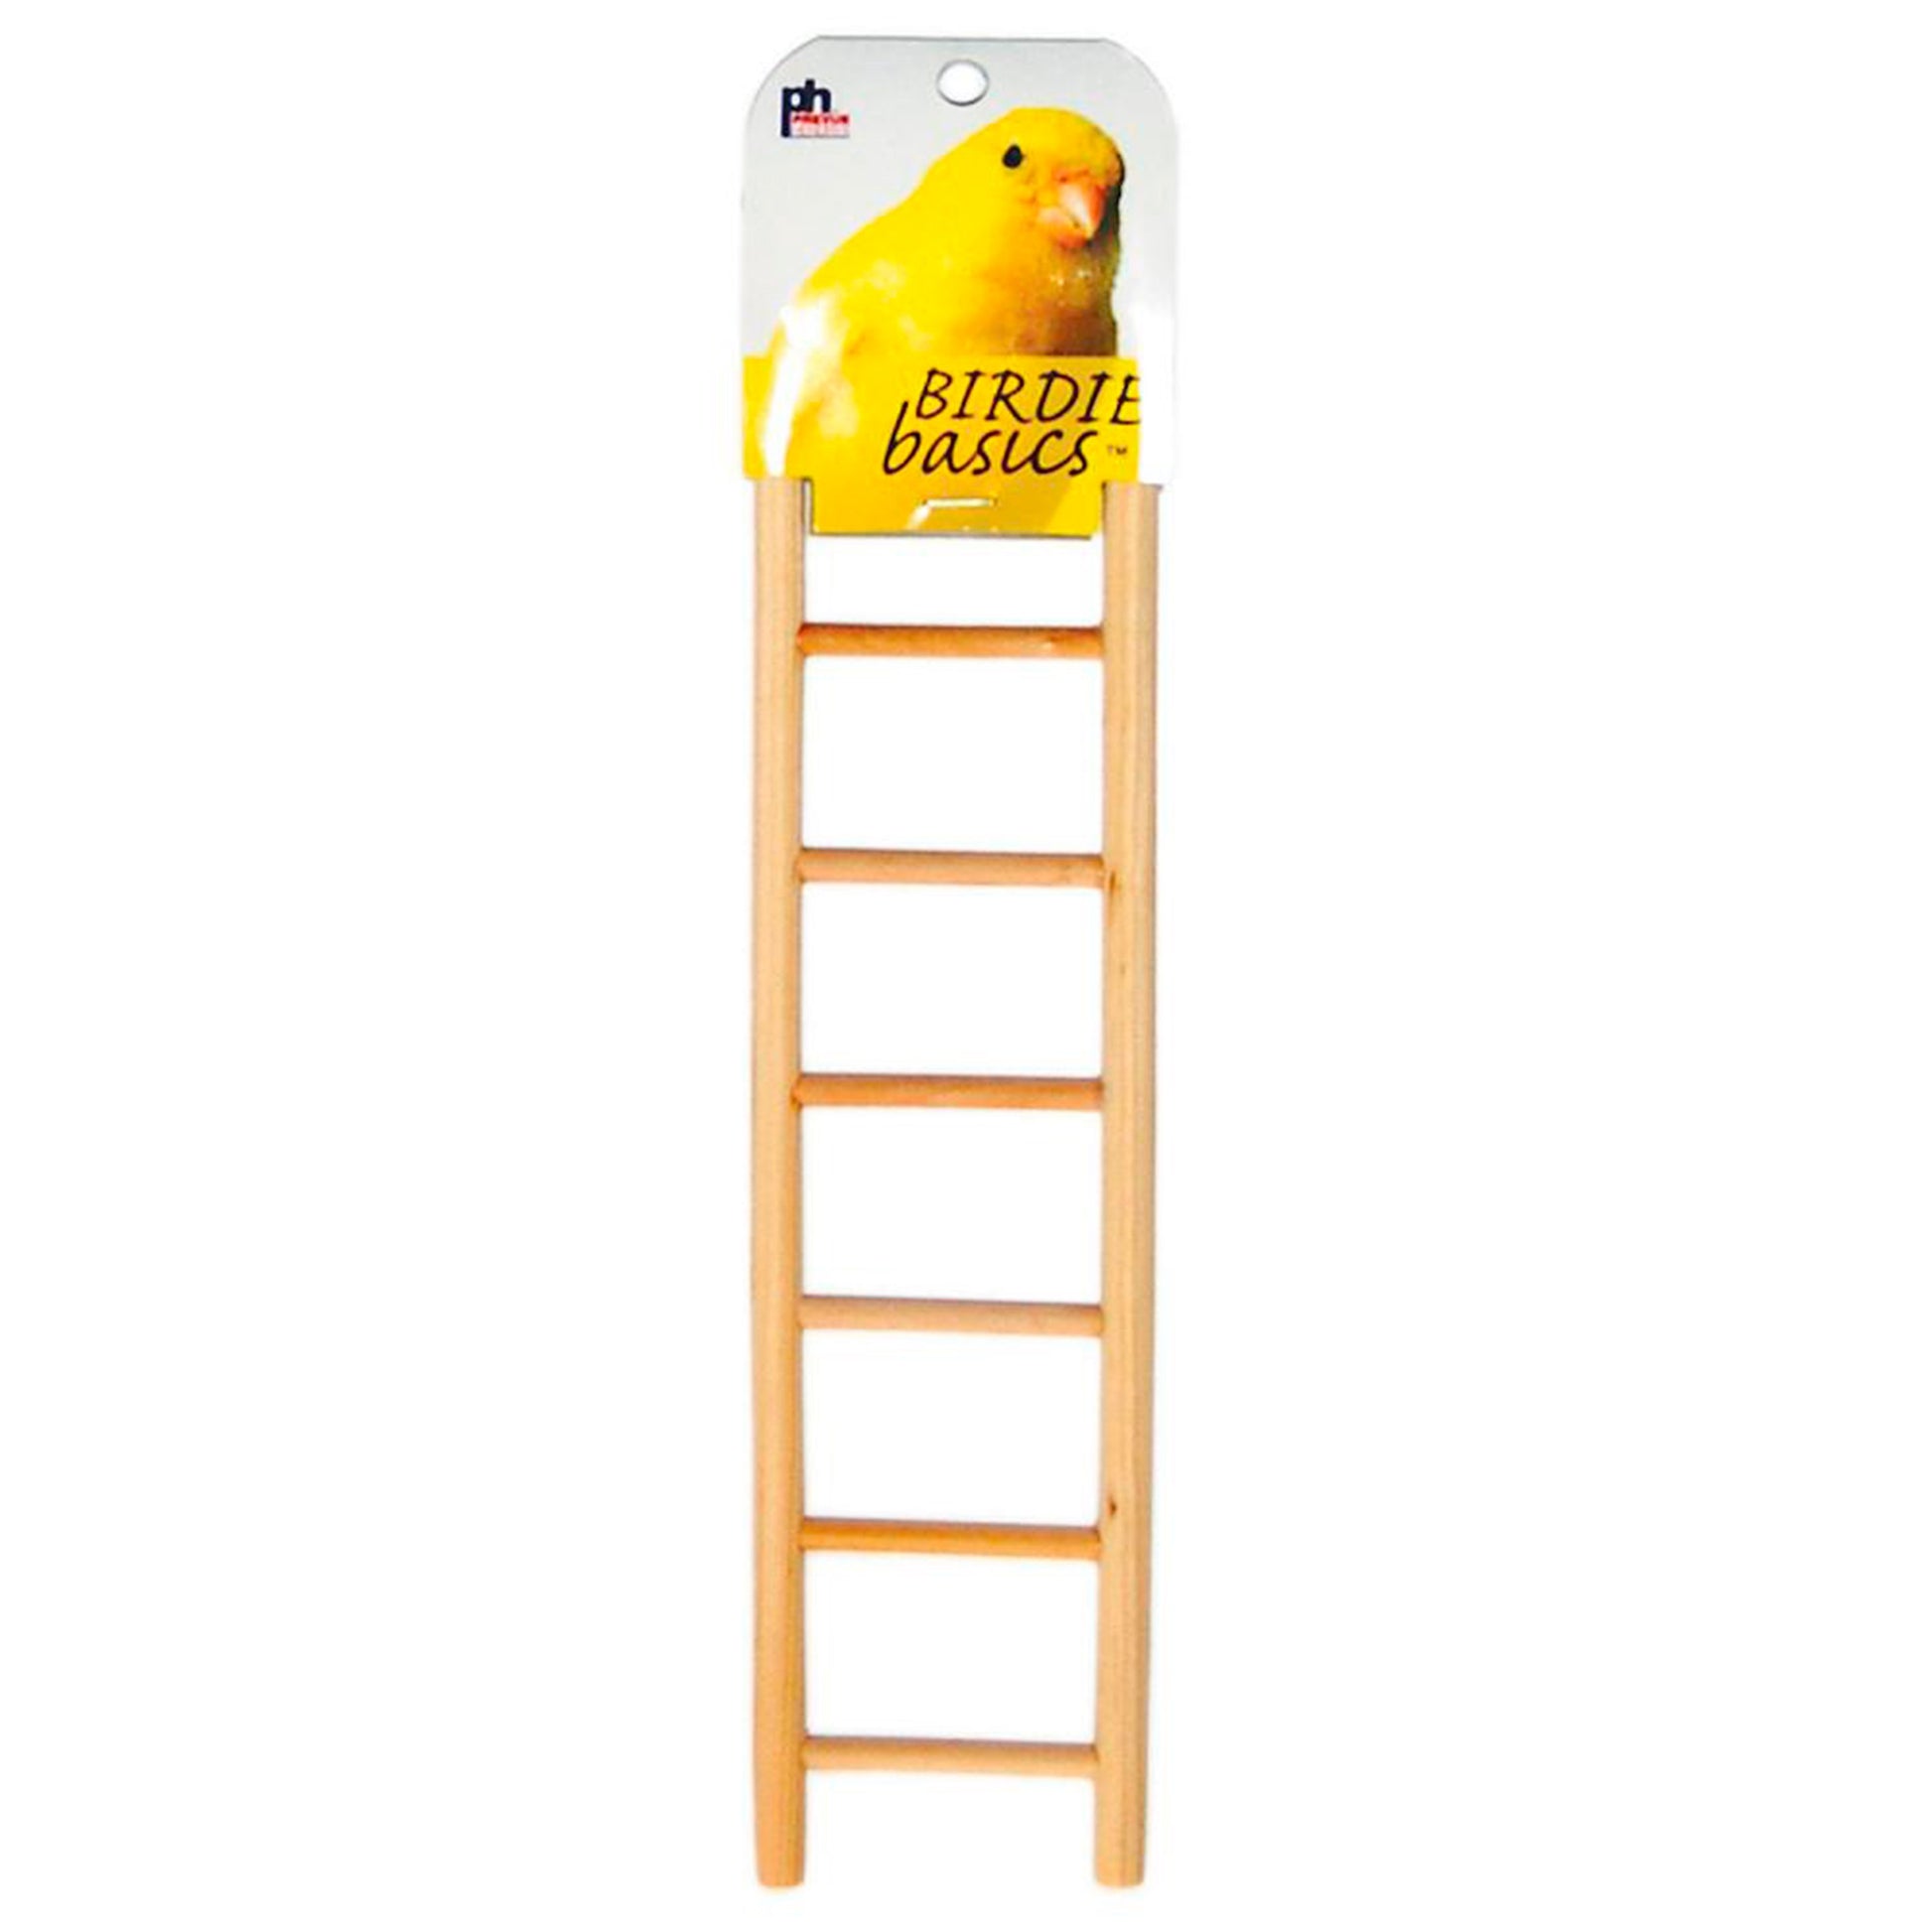 Prevue Pet Products Birdie Basics 7-Rung Ladder Unvarnished Hardwood, 2.88 in X 11.13 in, Prevue Pet Products